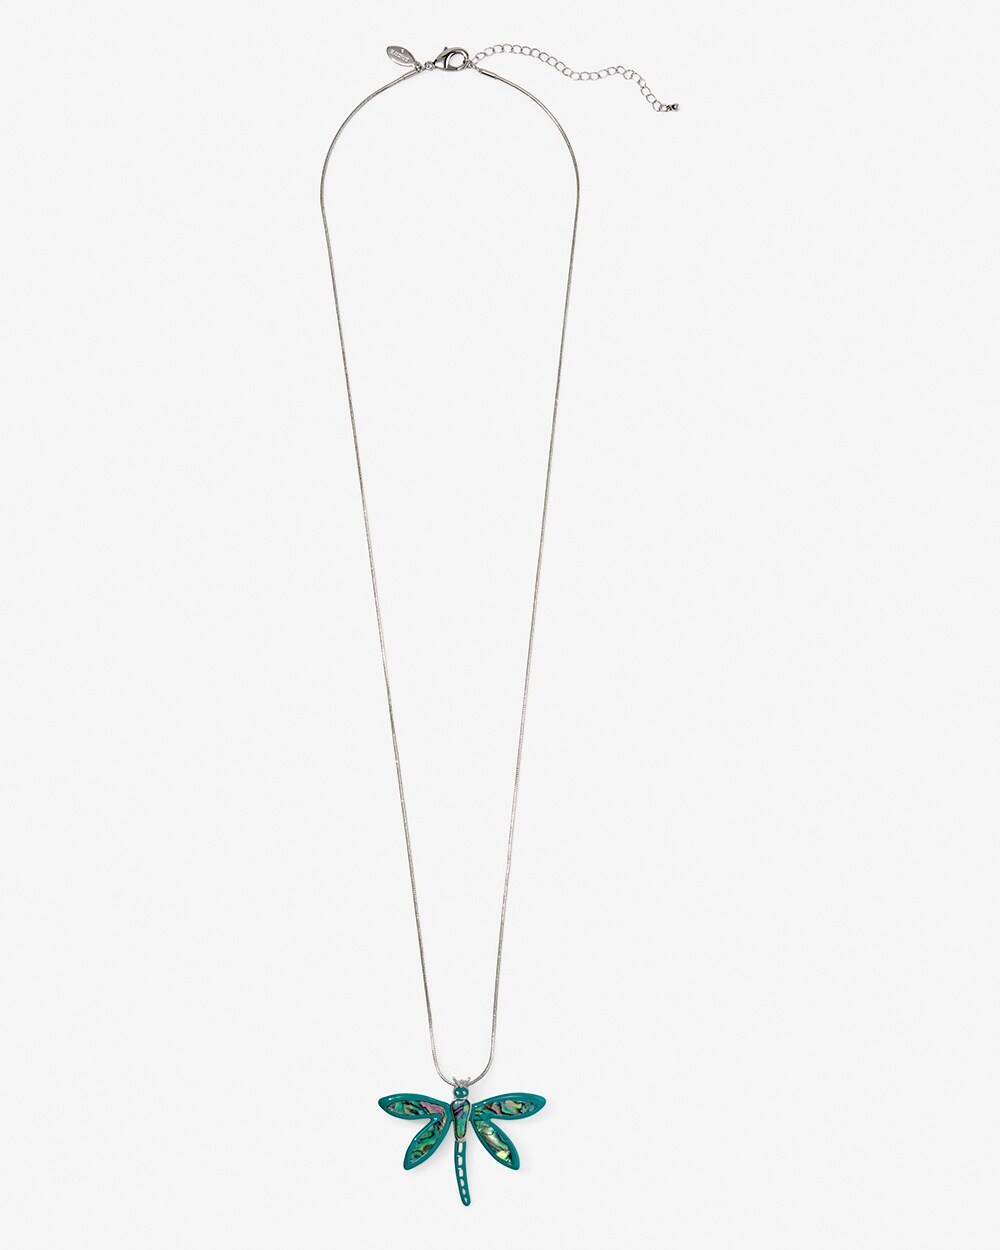 Whimsy Dragonfly Convertible Pindant Necklace